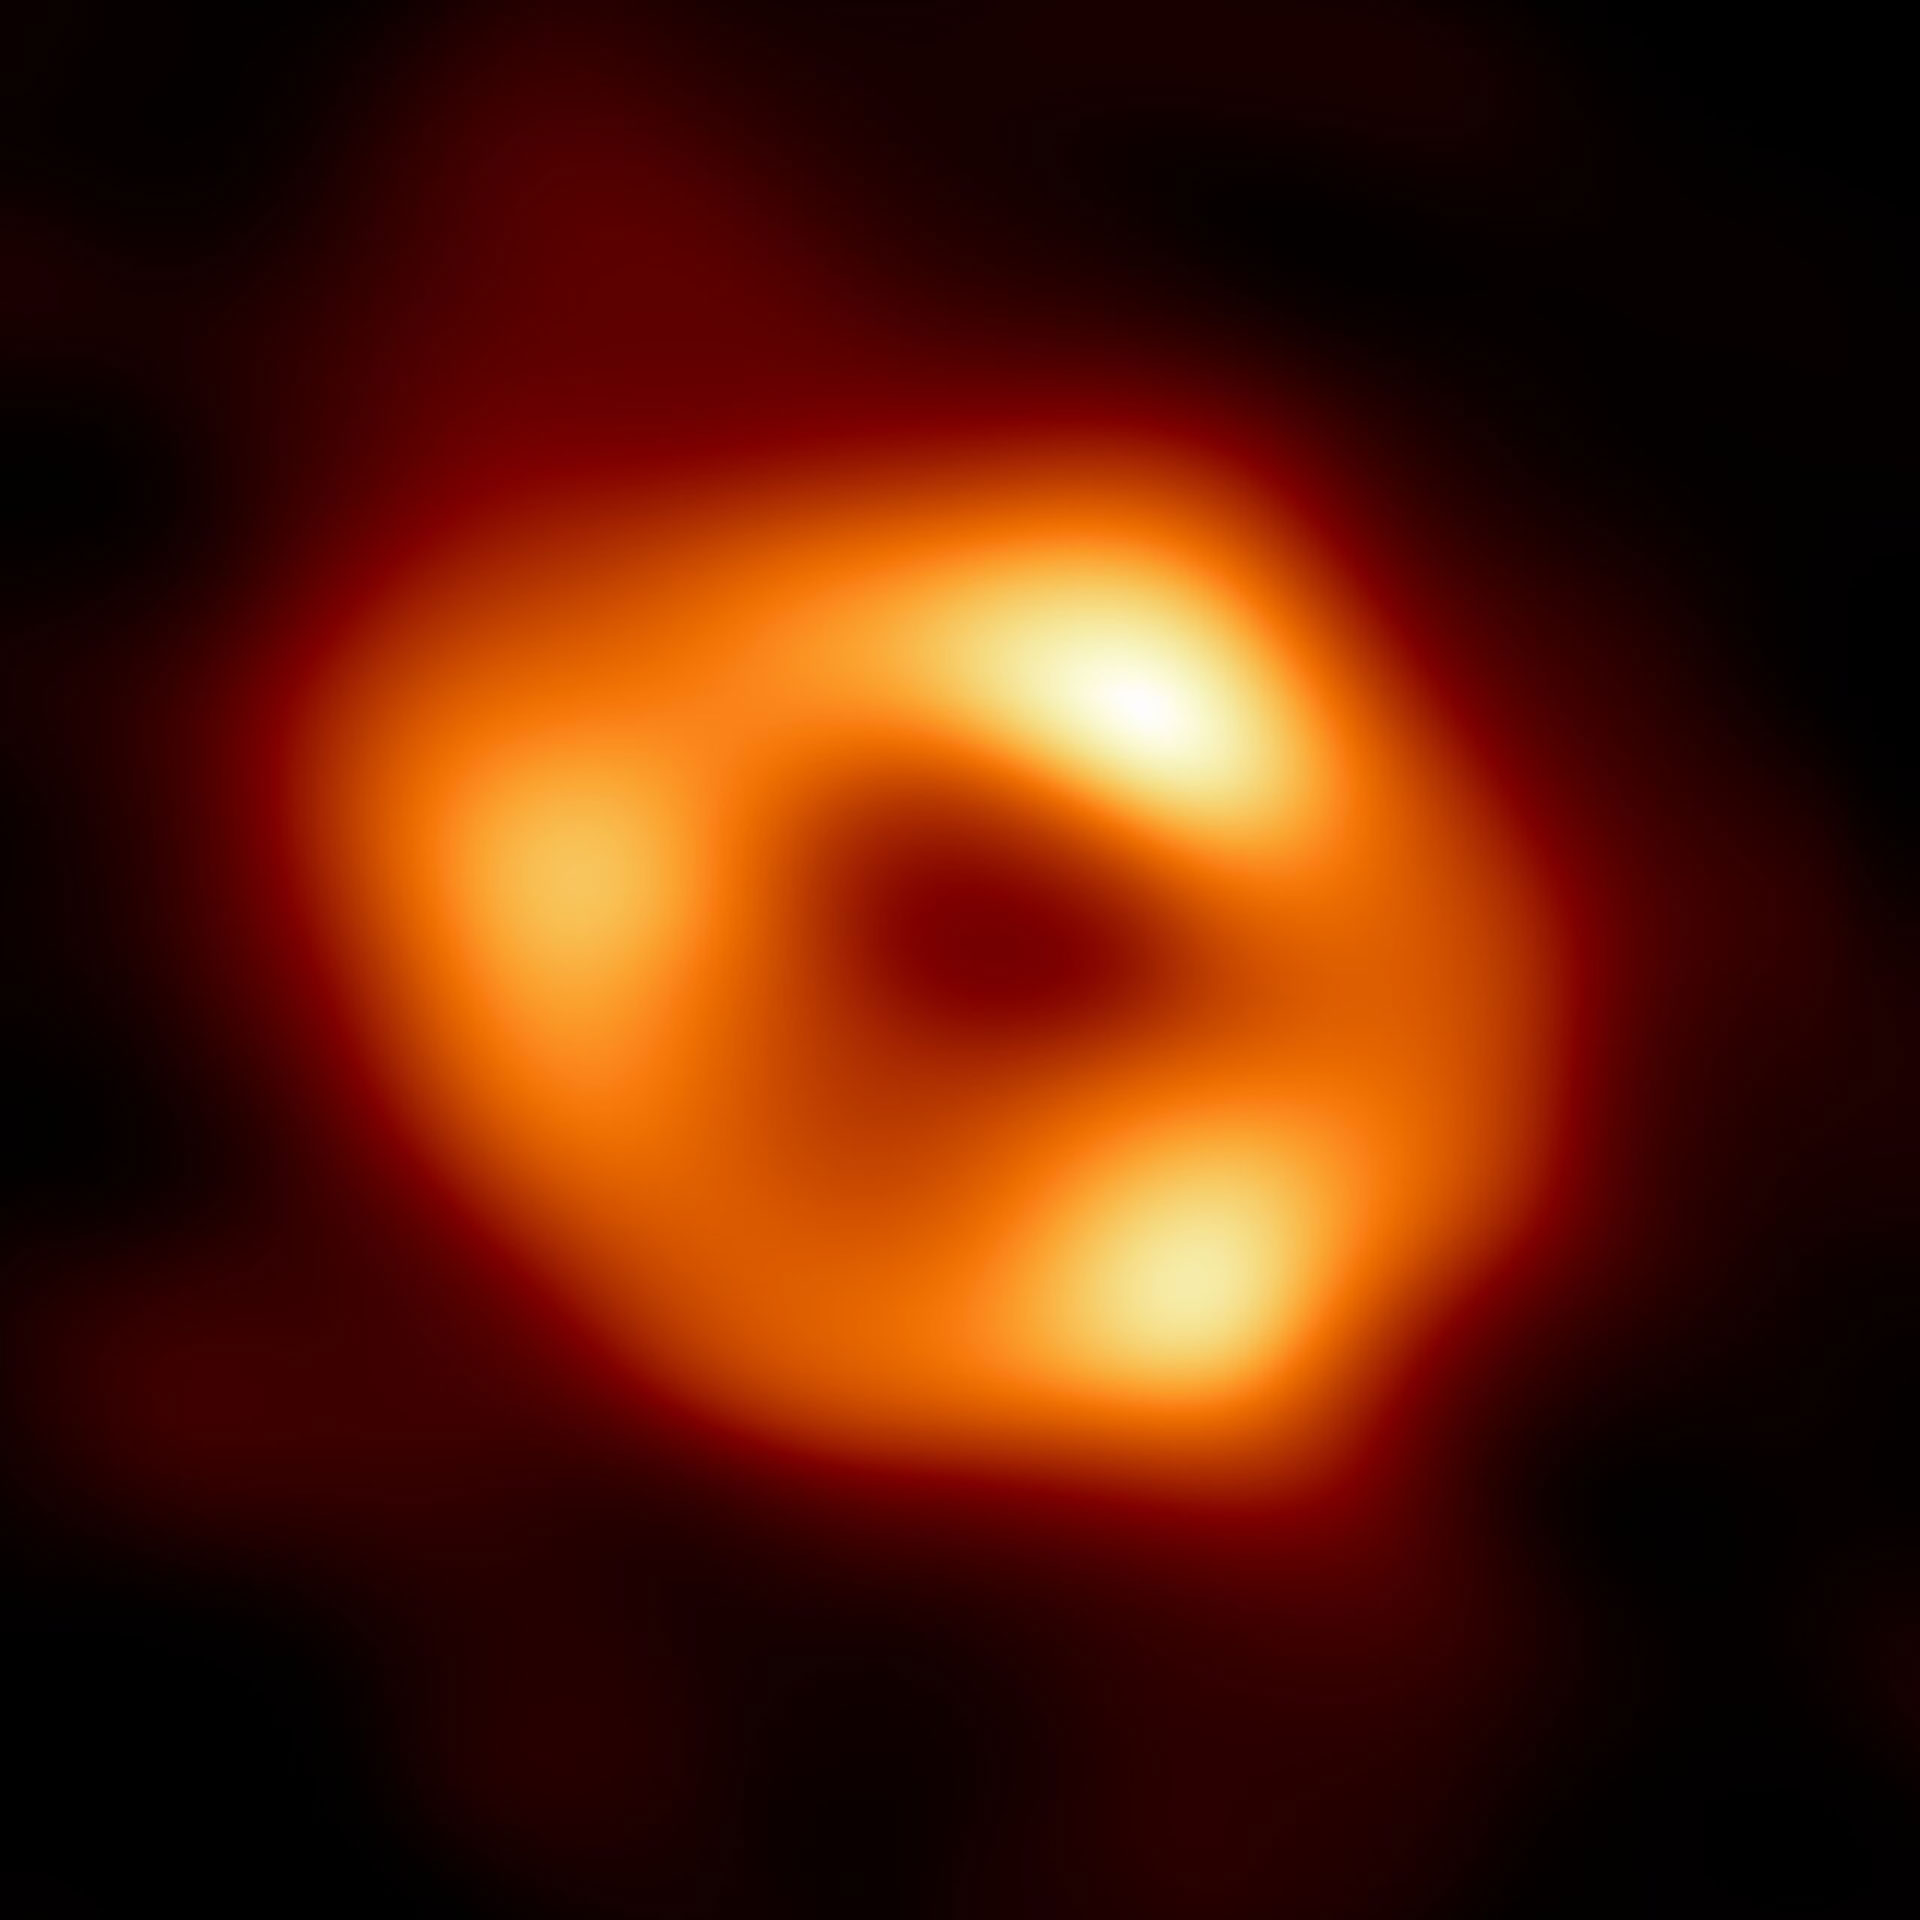 First photograph of the supermassive black hole at the center of our galaxy, the Milky Way, known as Sagittarius A. (EHT Collaboration)